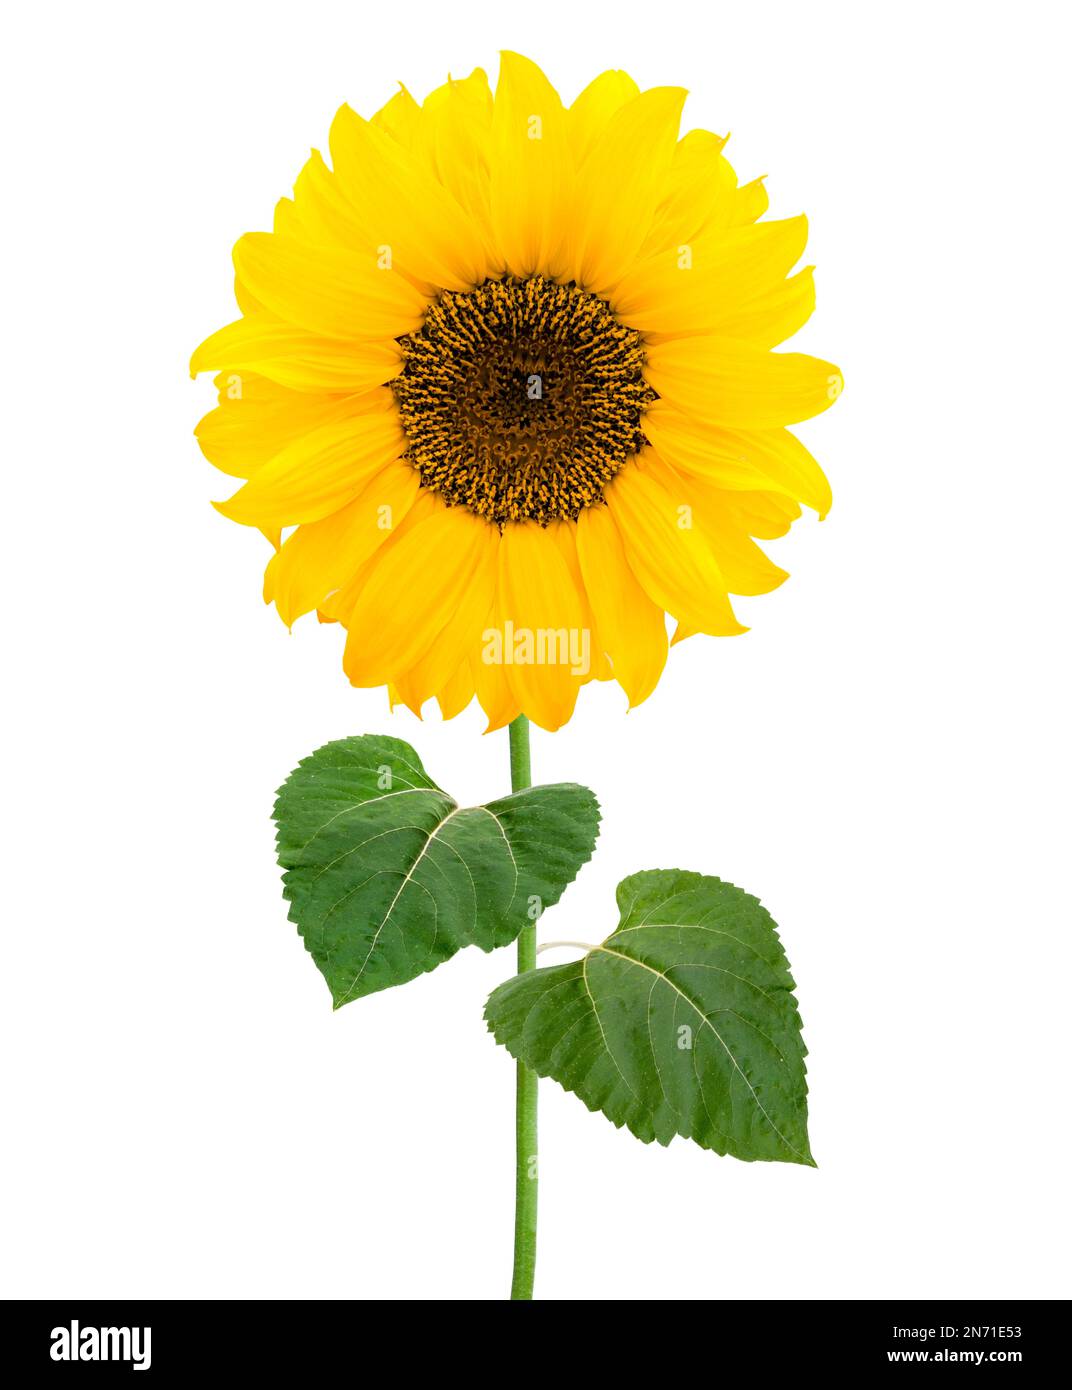 Sunflower with green leaves isolated Stock Photo